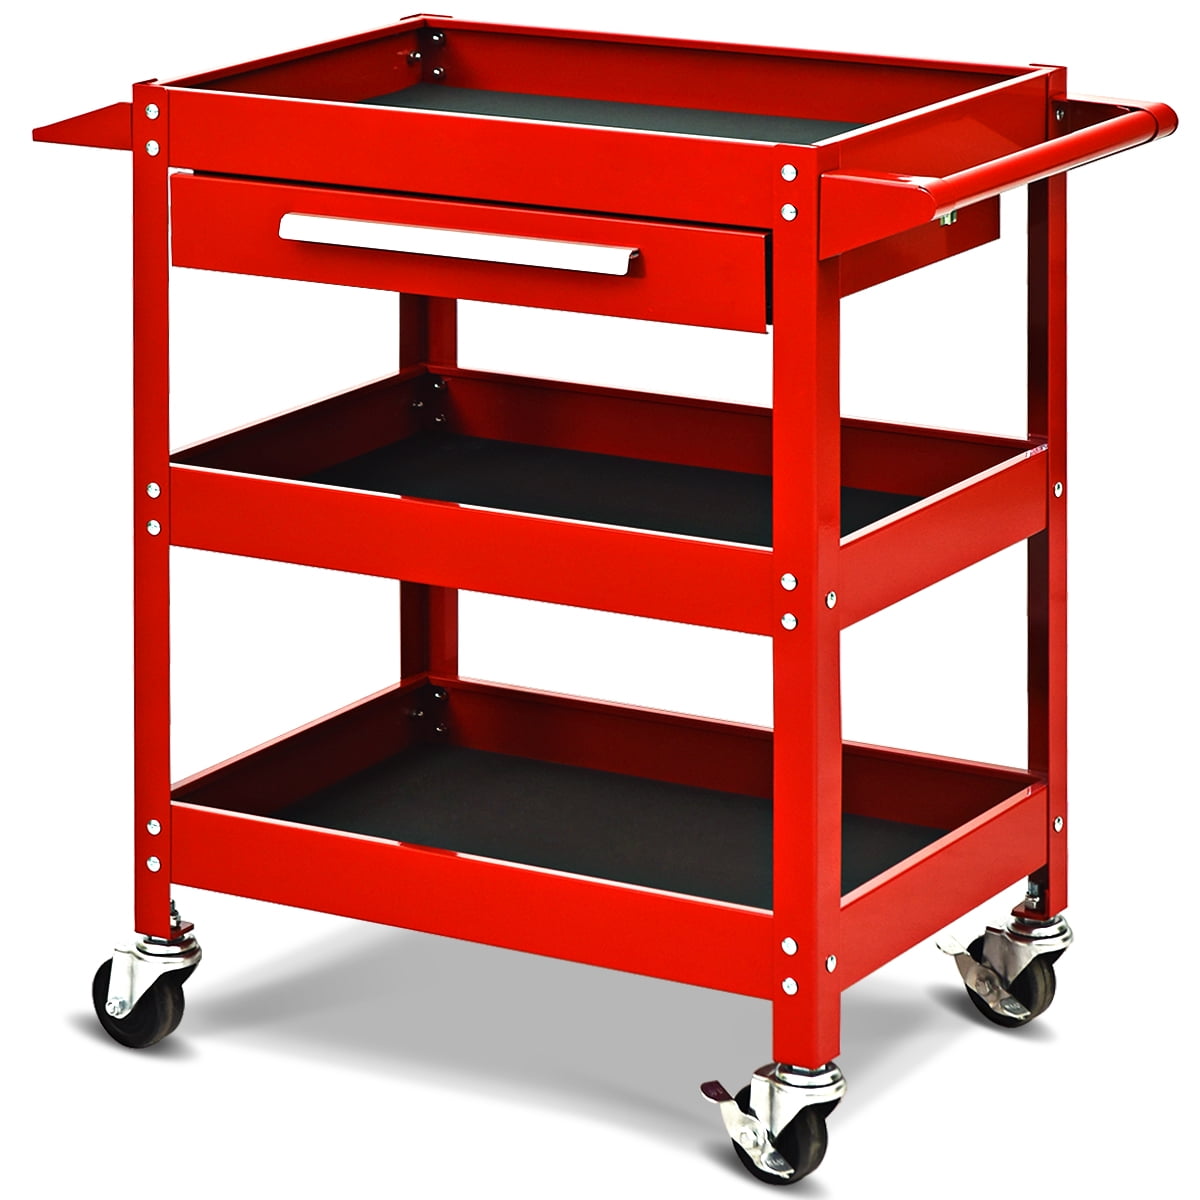 Details about   Three Tray Rolling Tool Cart Mechanic Cabinet Storage Toolbox Organizer W/Drawer 